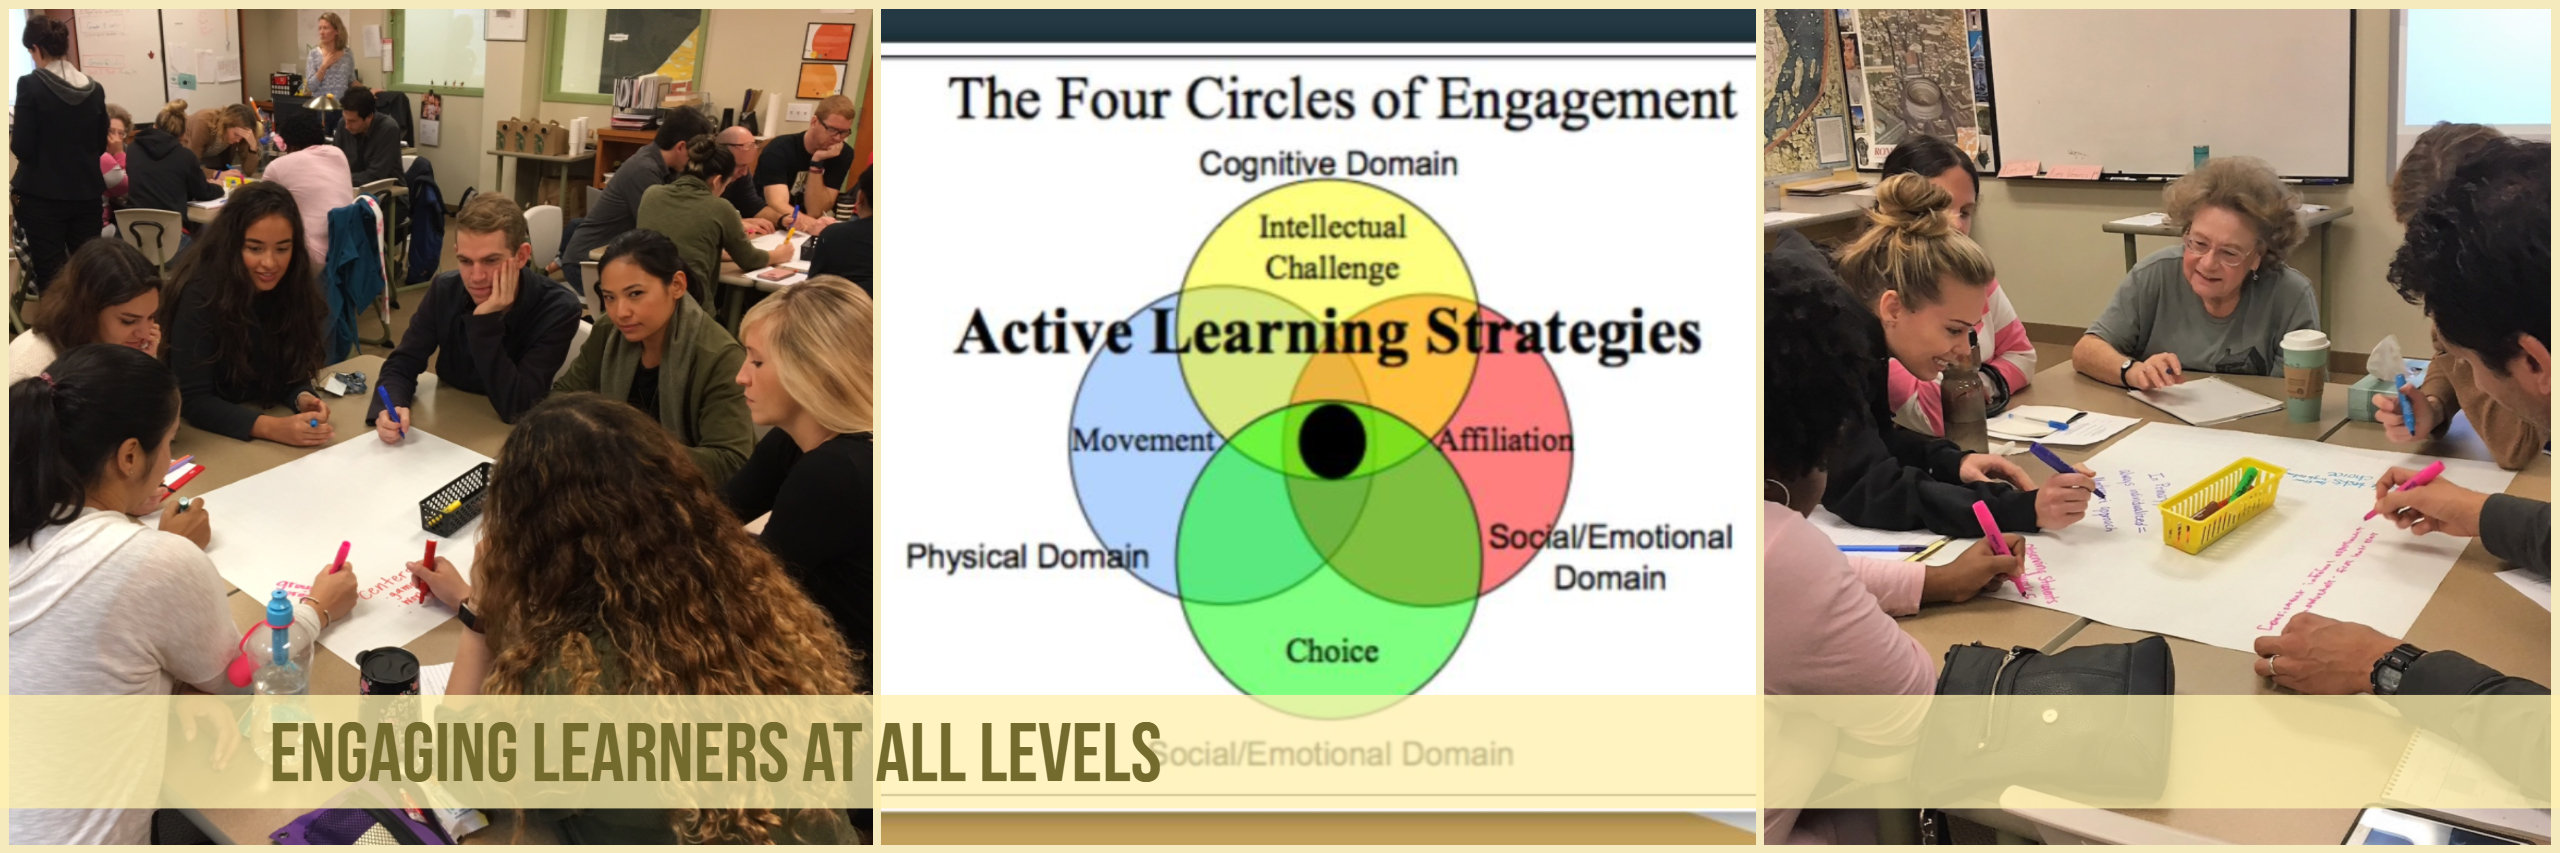 Engaging Learners at All Levels